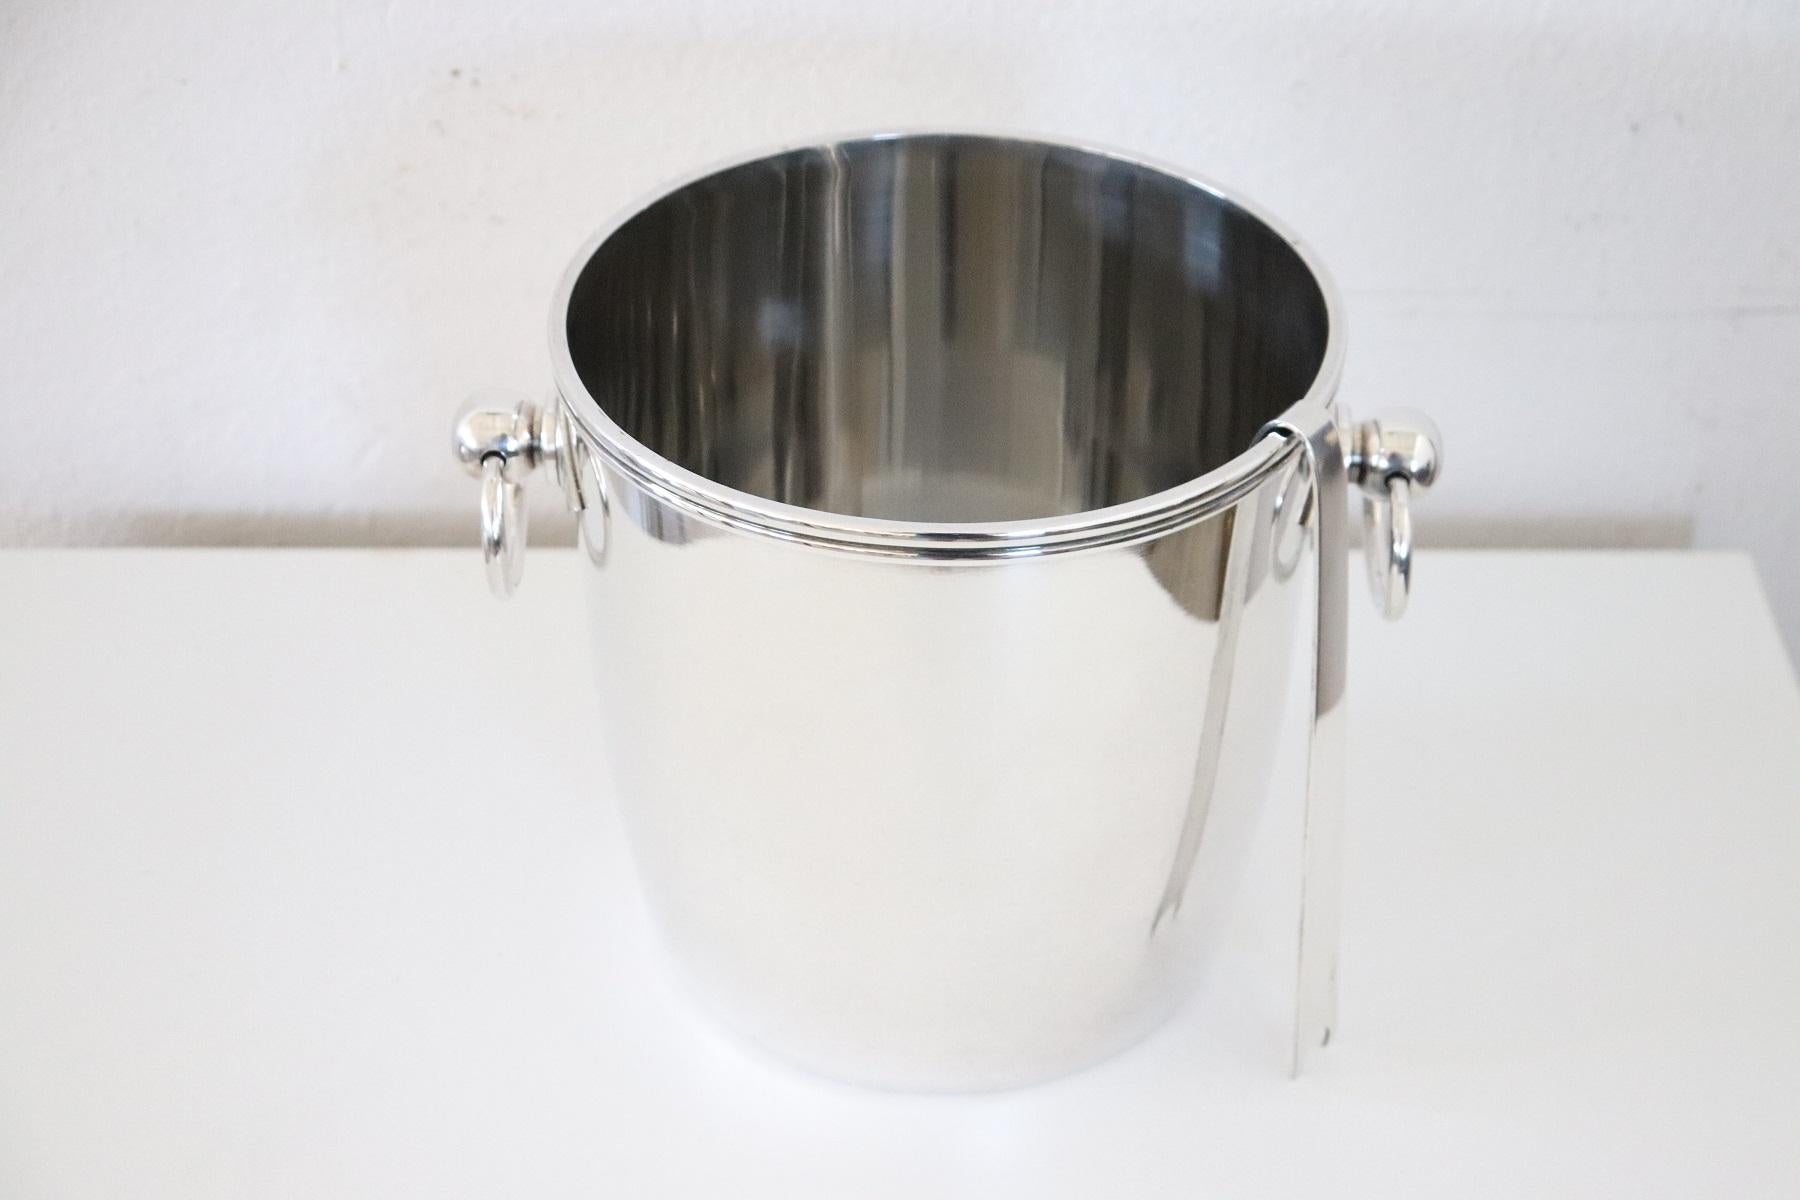 Beautiful elegant French Chistofle vintage ice or champagne bucket is Modern. It is hallmarked on the bottom with the 